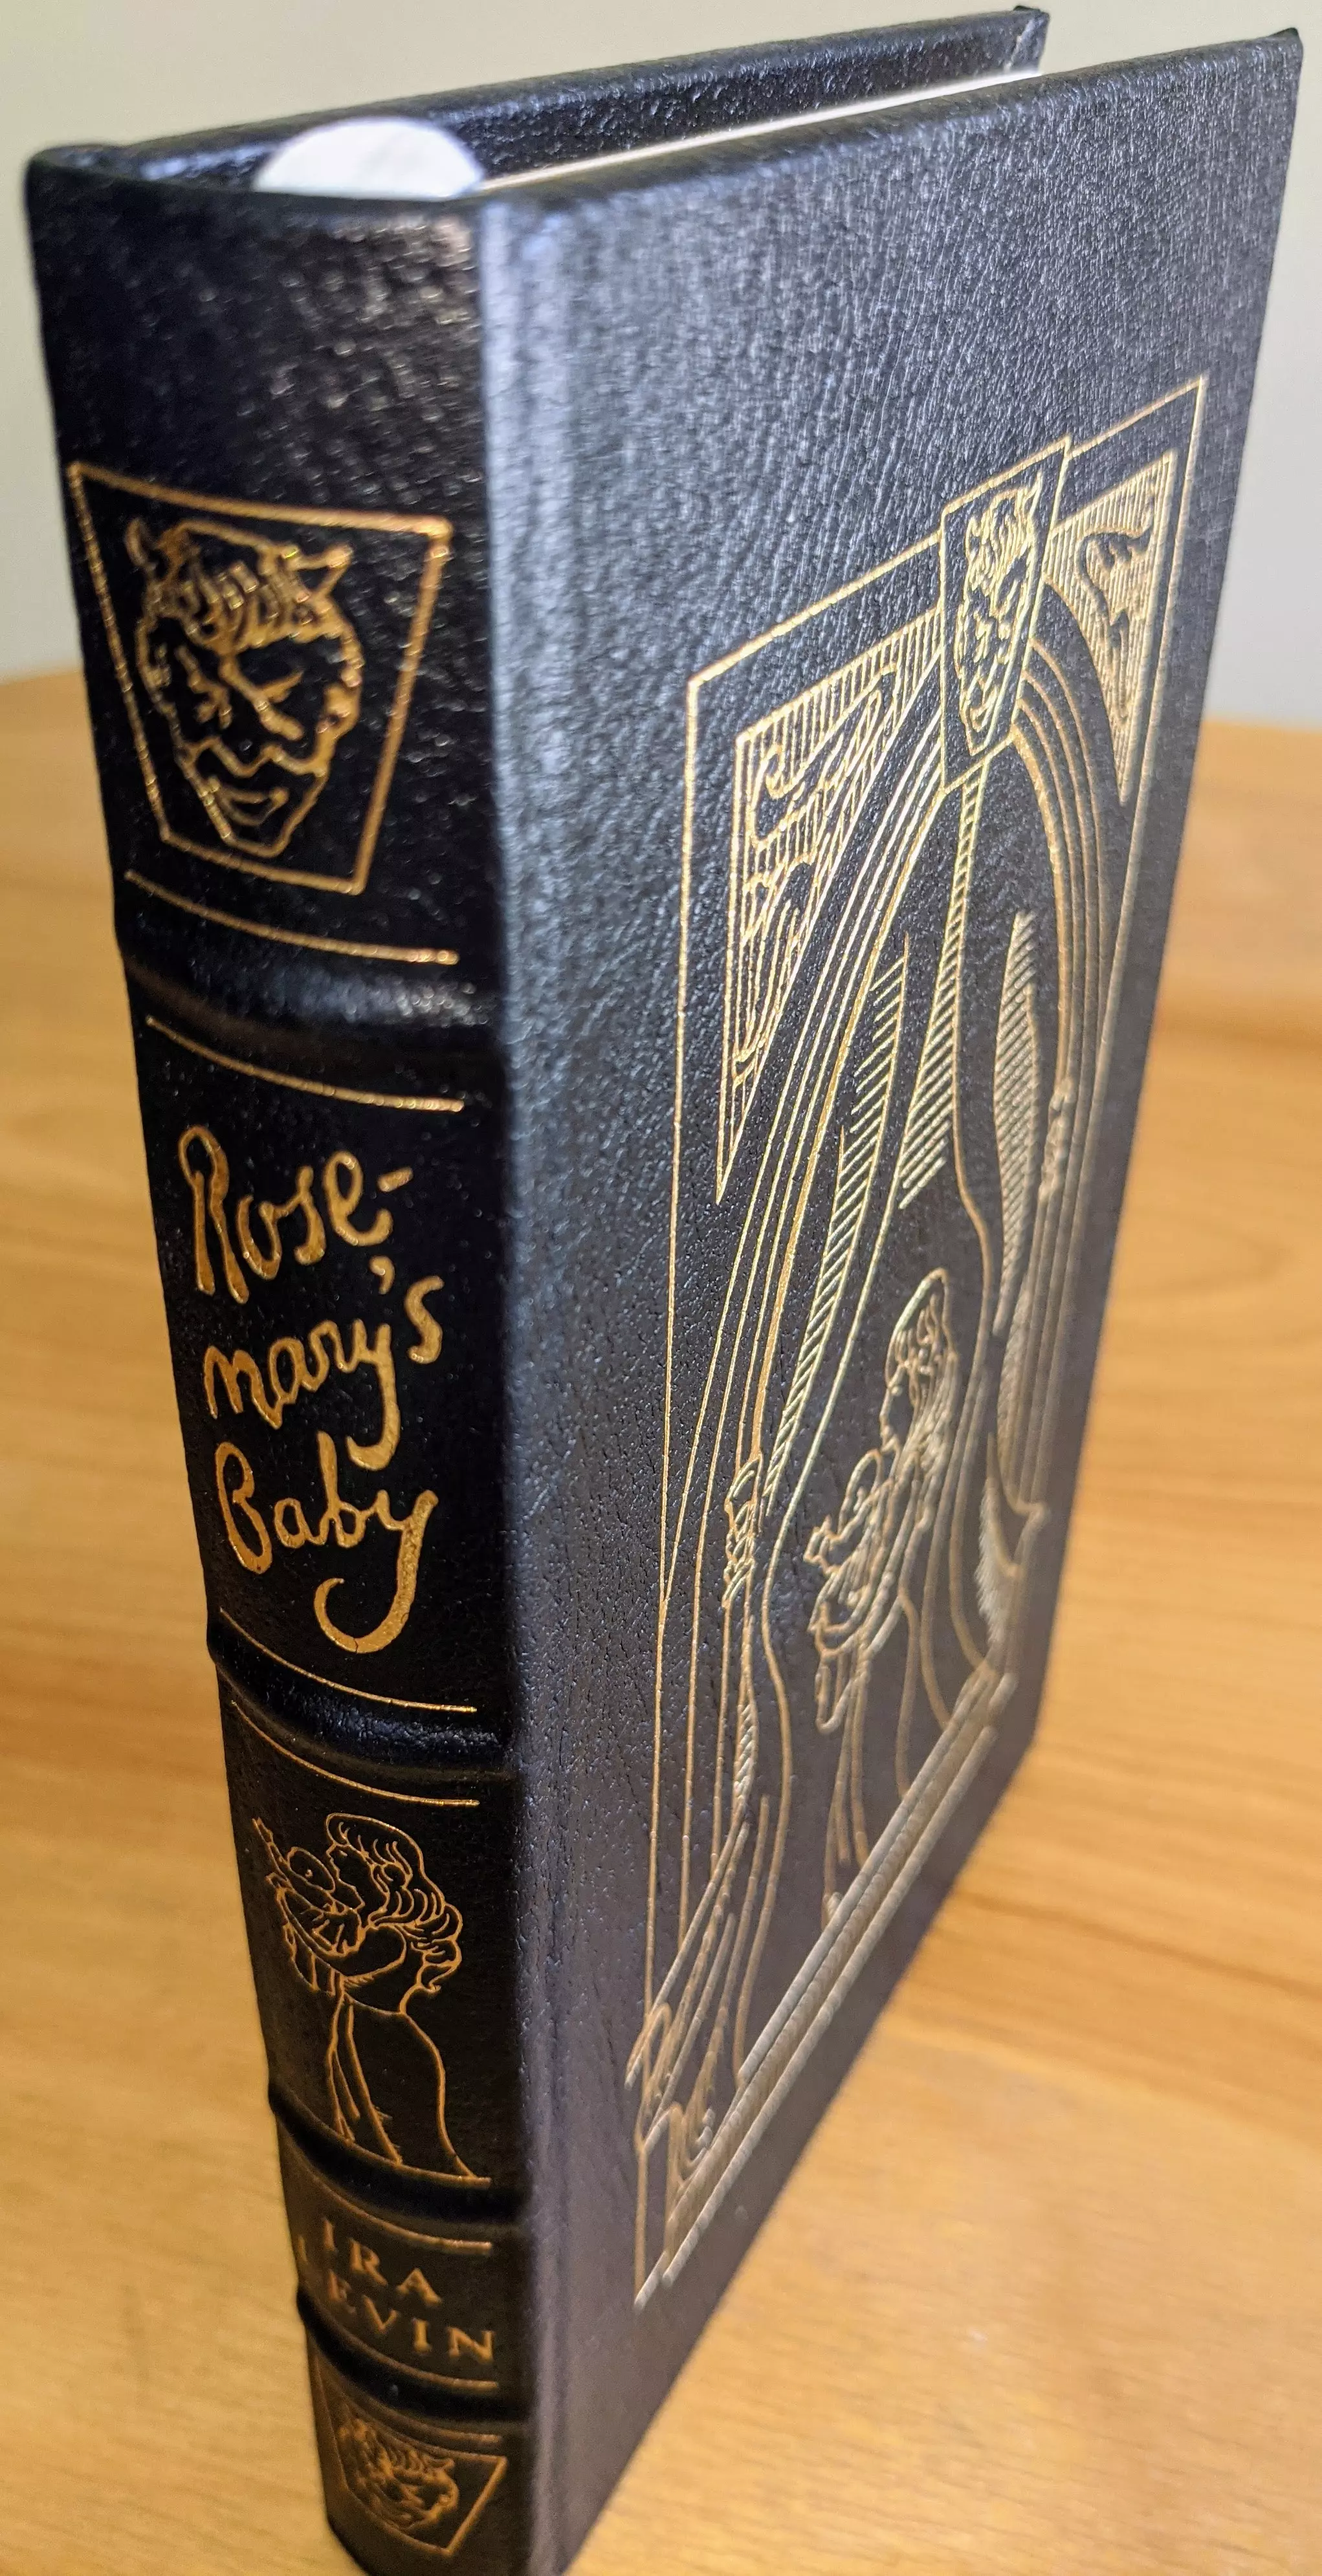 Stunning Black Leather Bound hardback book with hubbed spine, cover artwork in 22kt gold, printed on archival paper with gold gilded edges, smyth sewing & concealed muslin joints
	  - original artwork by Frank Kelly Freas